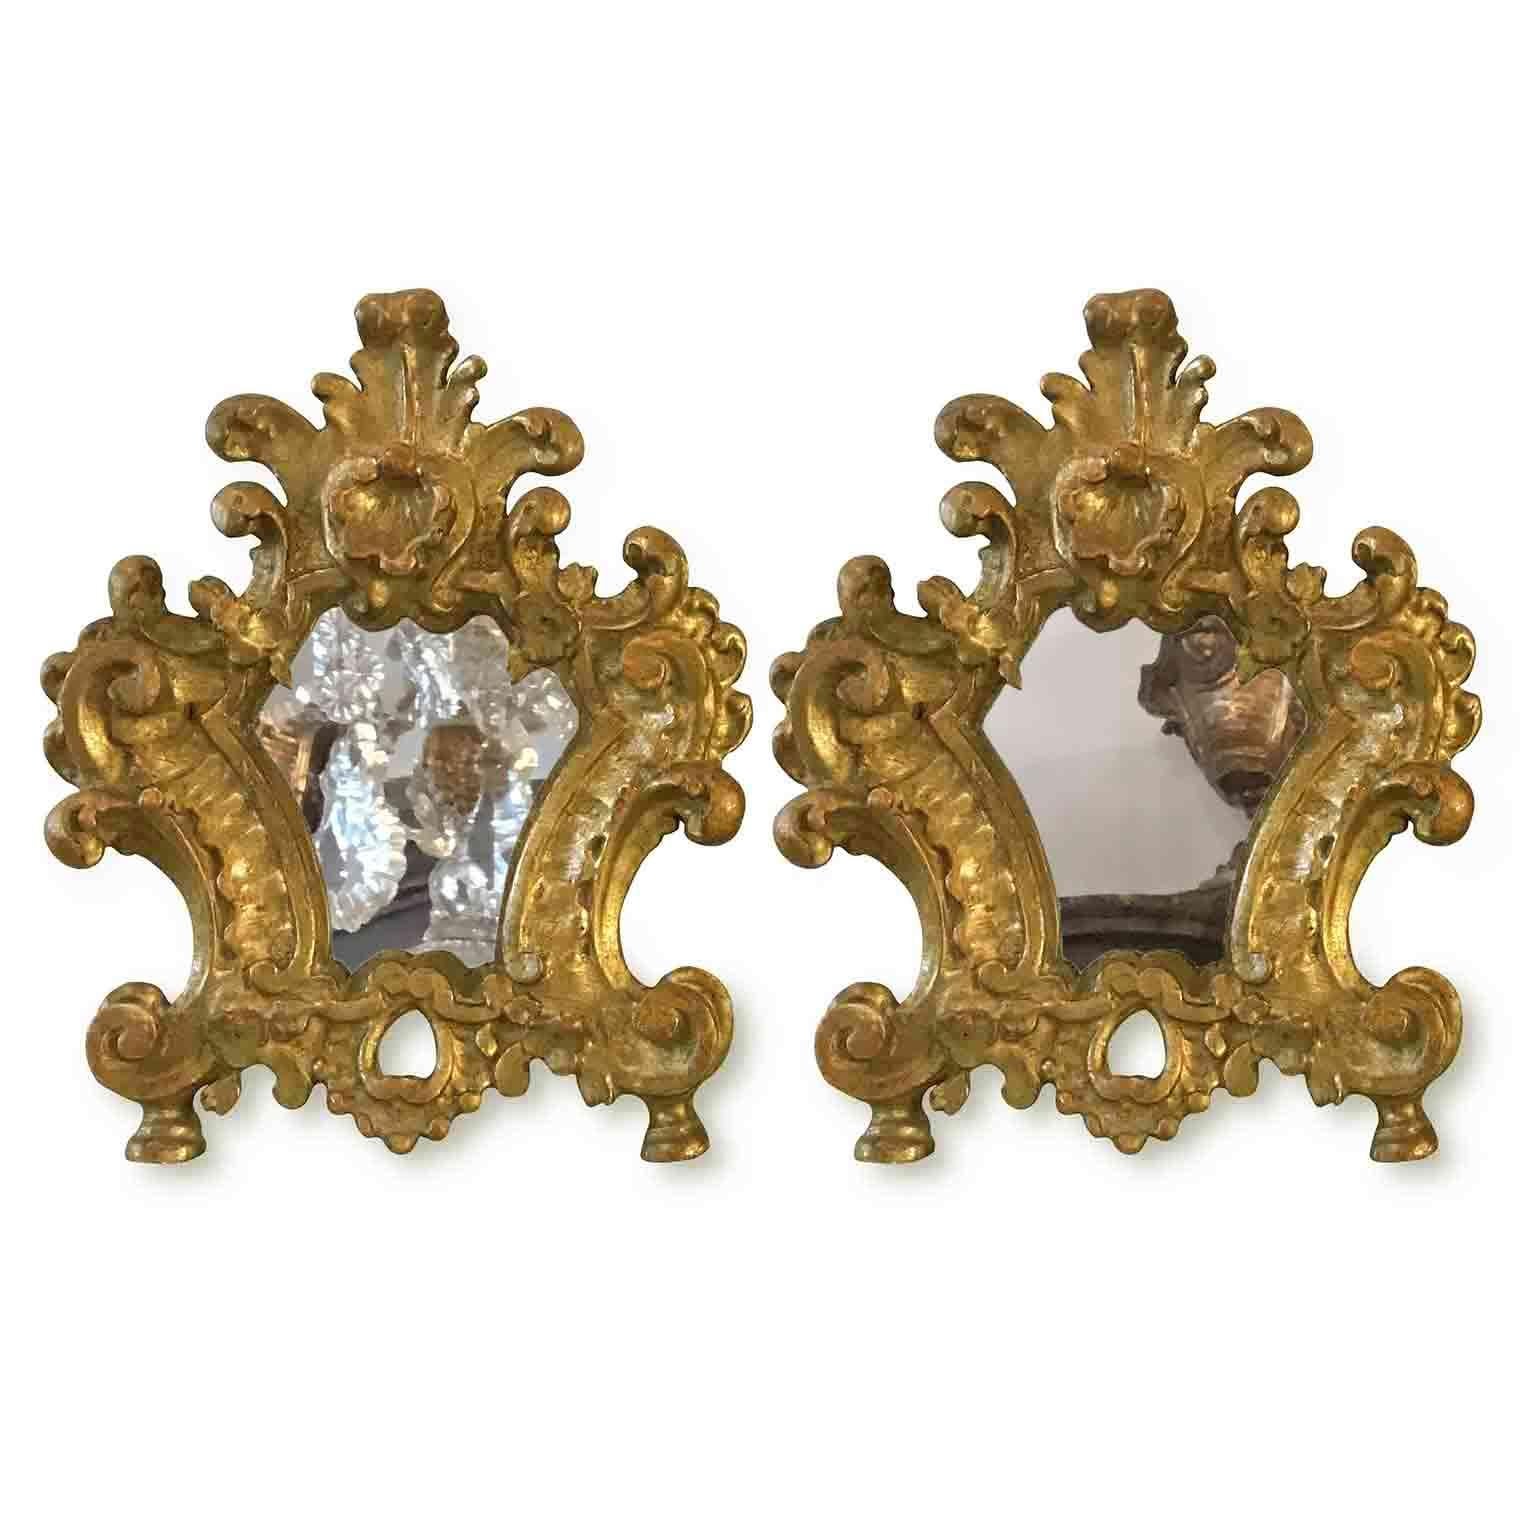 A charming pair of 18th century carved and giltwood mirrors, small altar cards or cantagloria from Italy. 
Shaped, with scrolling and vegetal deep carving, they are realized in cembran pinewood and have an original gold leaf gilding, dating back to